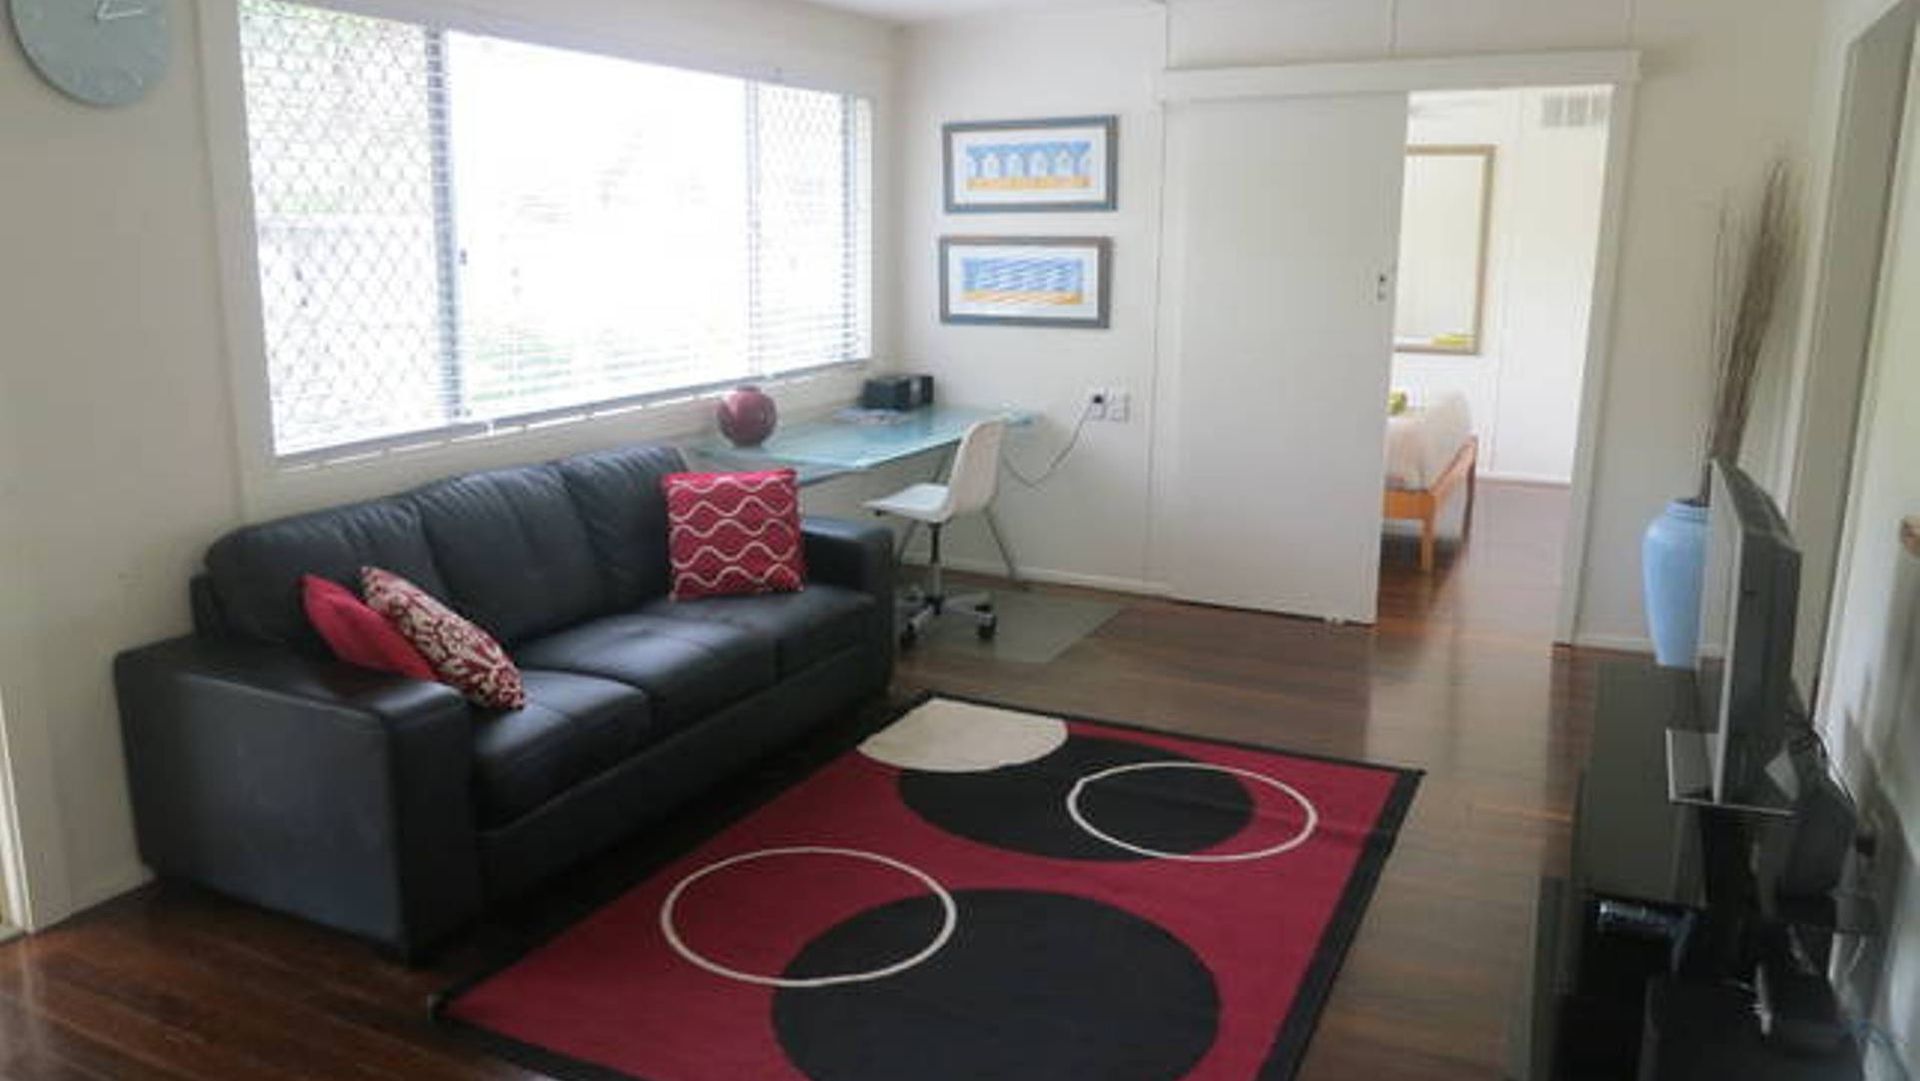 Coffs Harbour Beach House, One of the Best Located Holiday Homes in Coffs!!